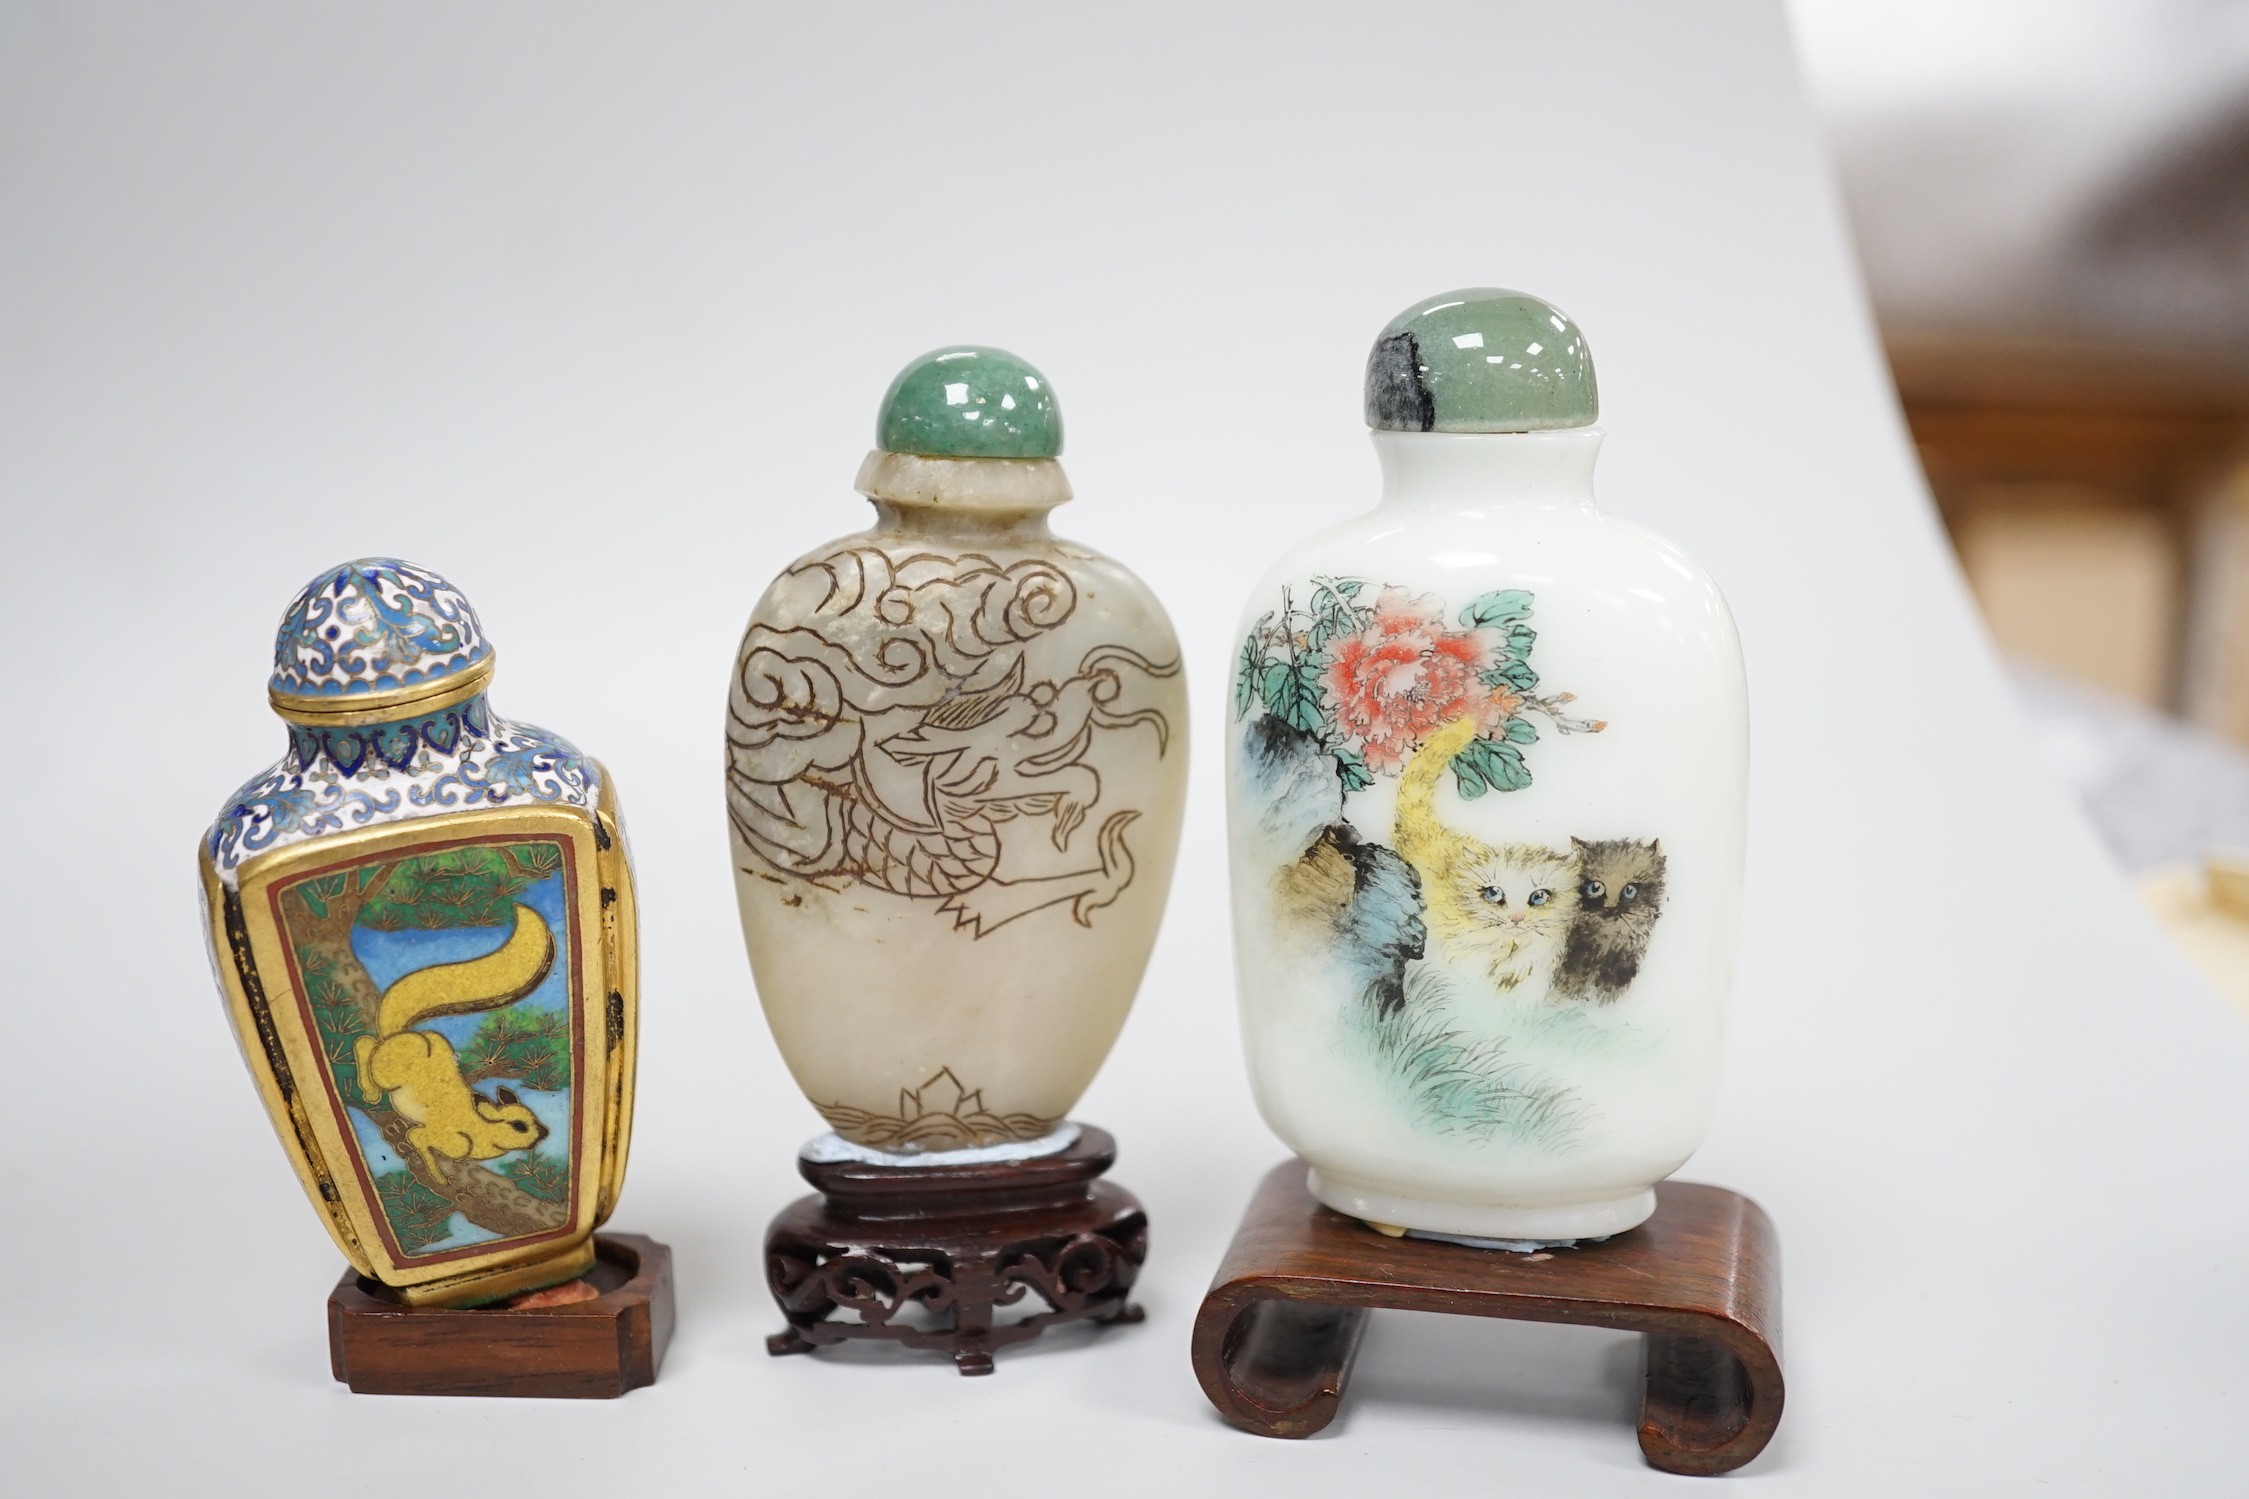 A Chinese cloisonné enamel snuff bottle, enamelled glass and stone snuff bottles. Tallest 8cm (3)